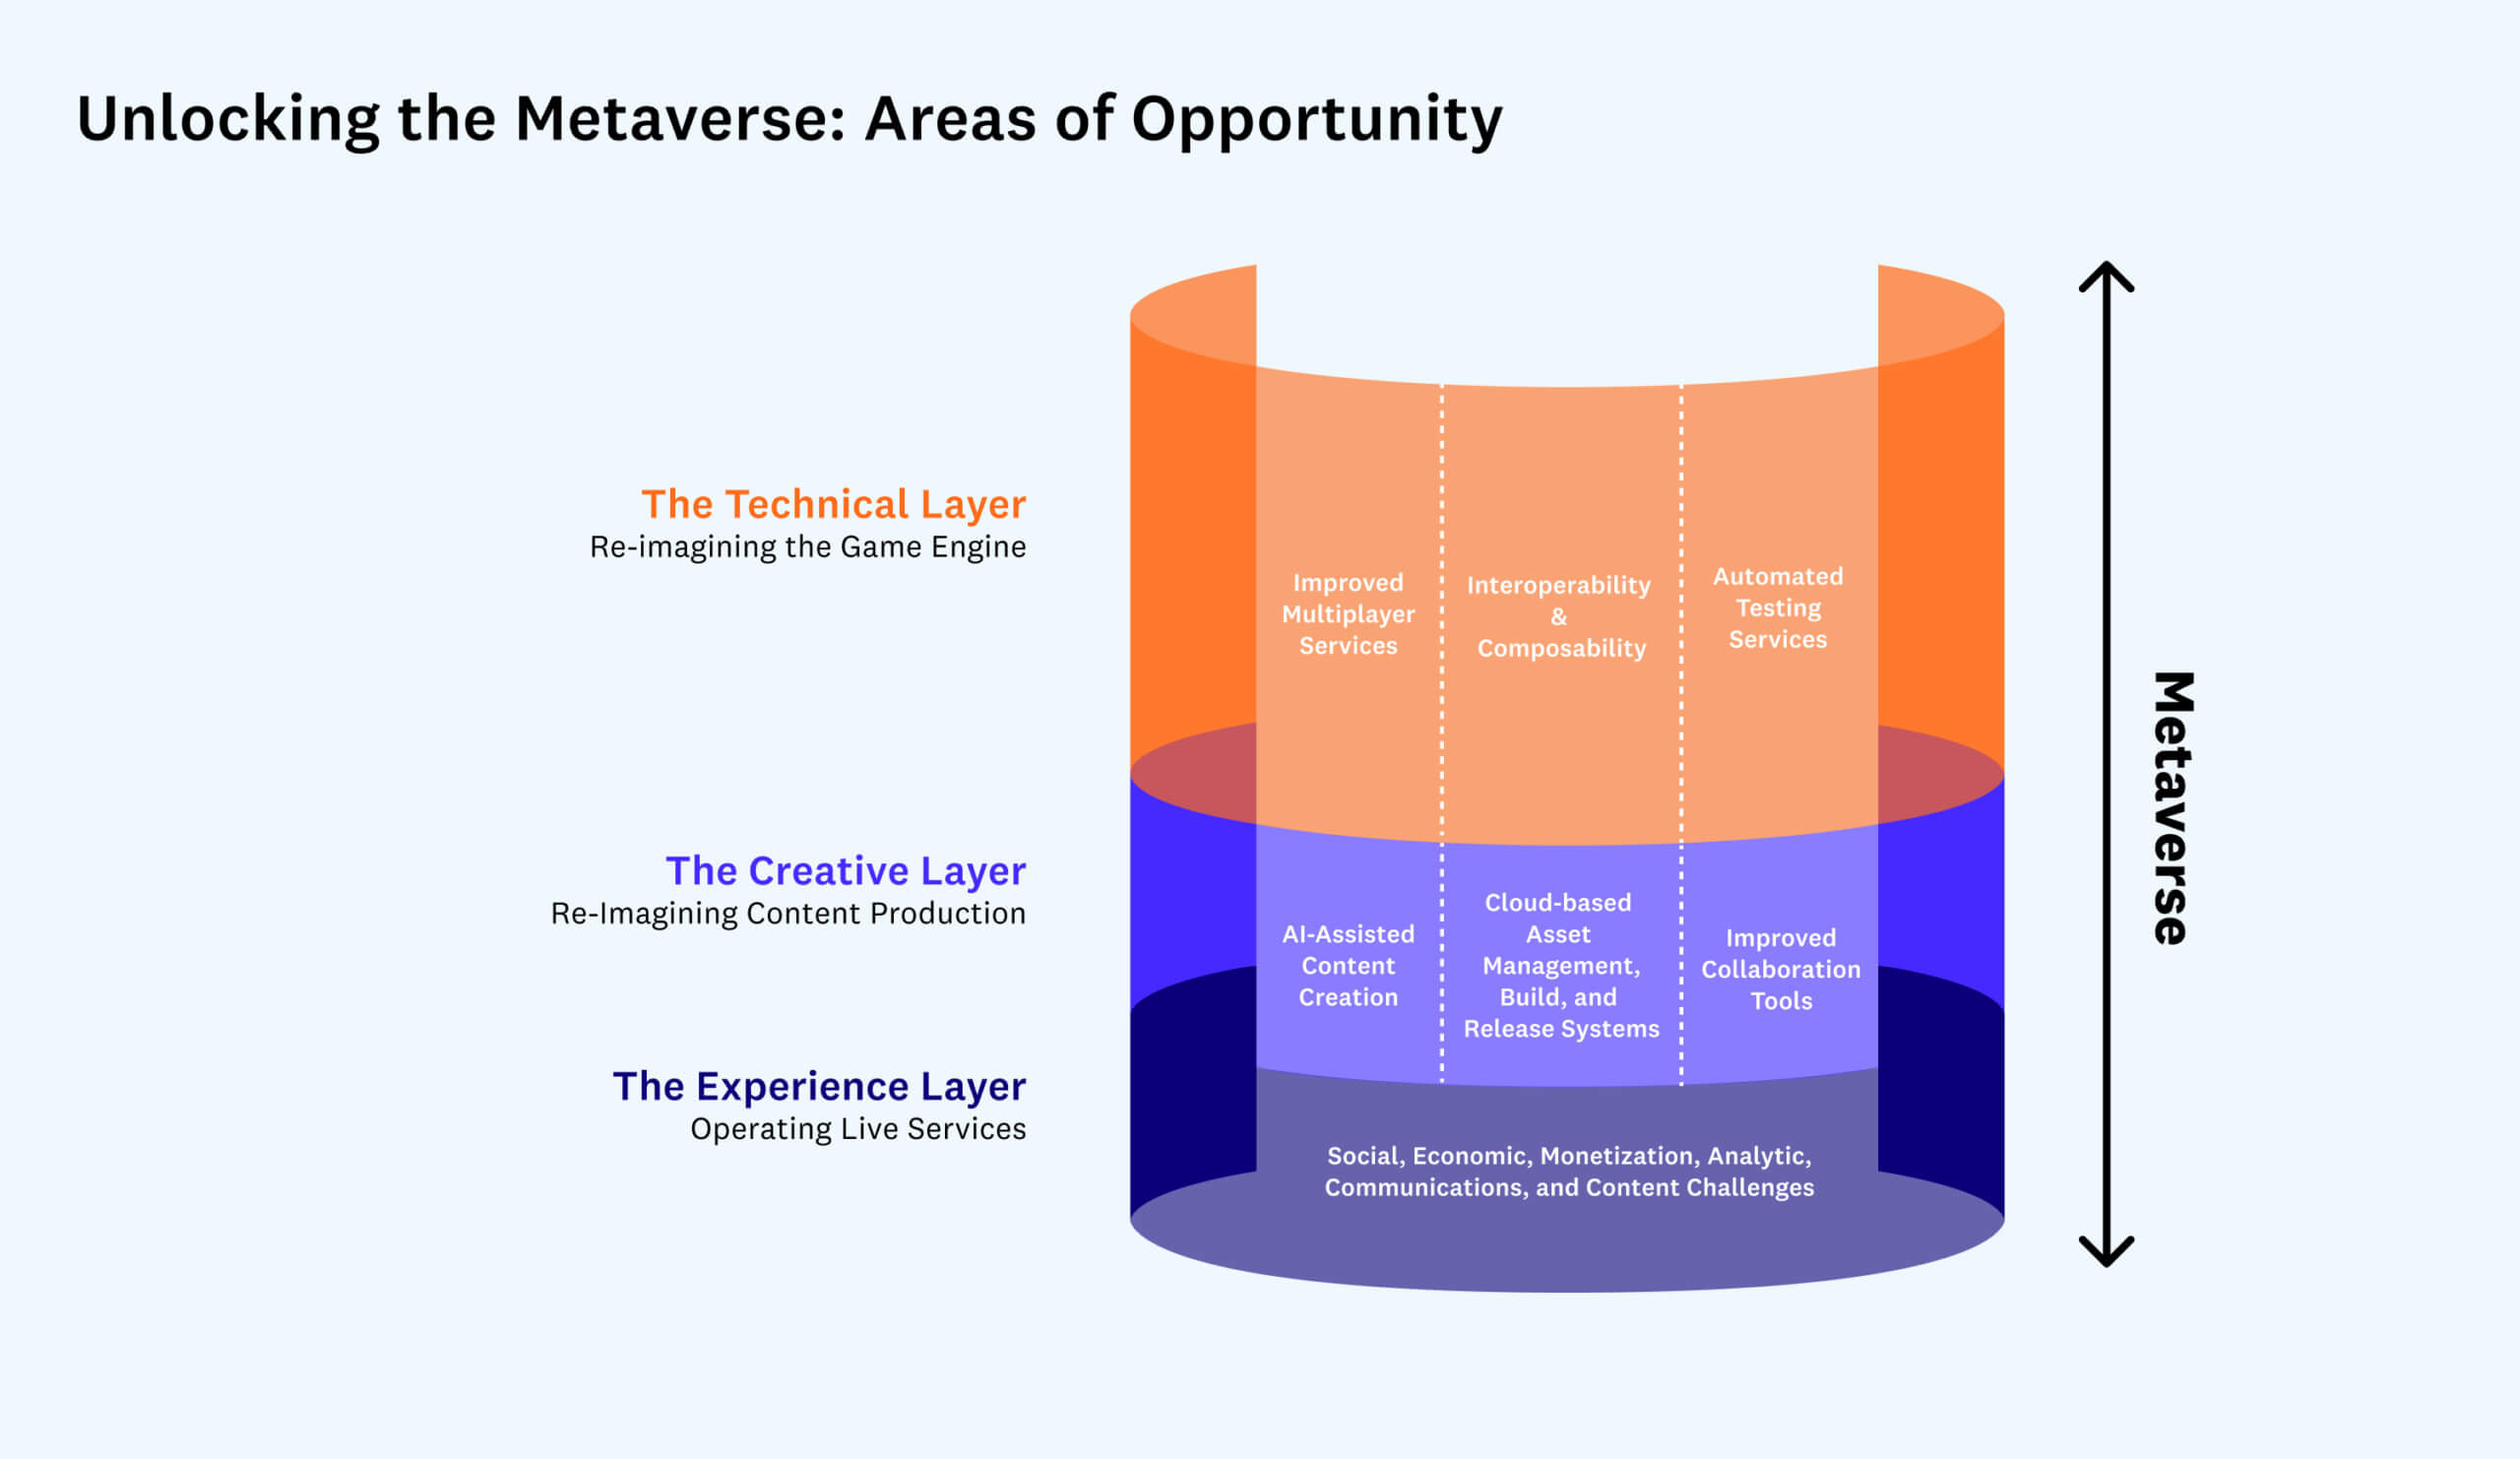 Three Layers of Opportunity to Unlock the Metaverse